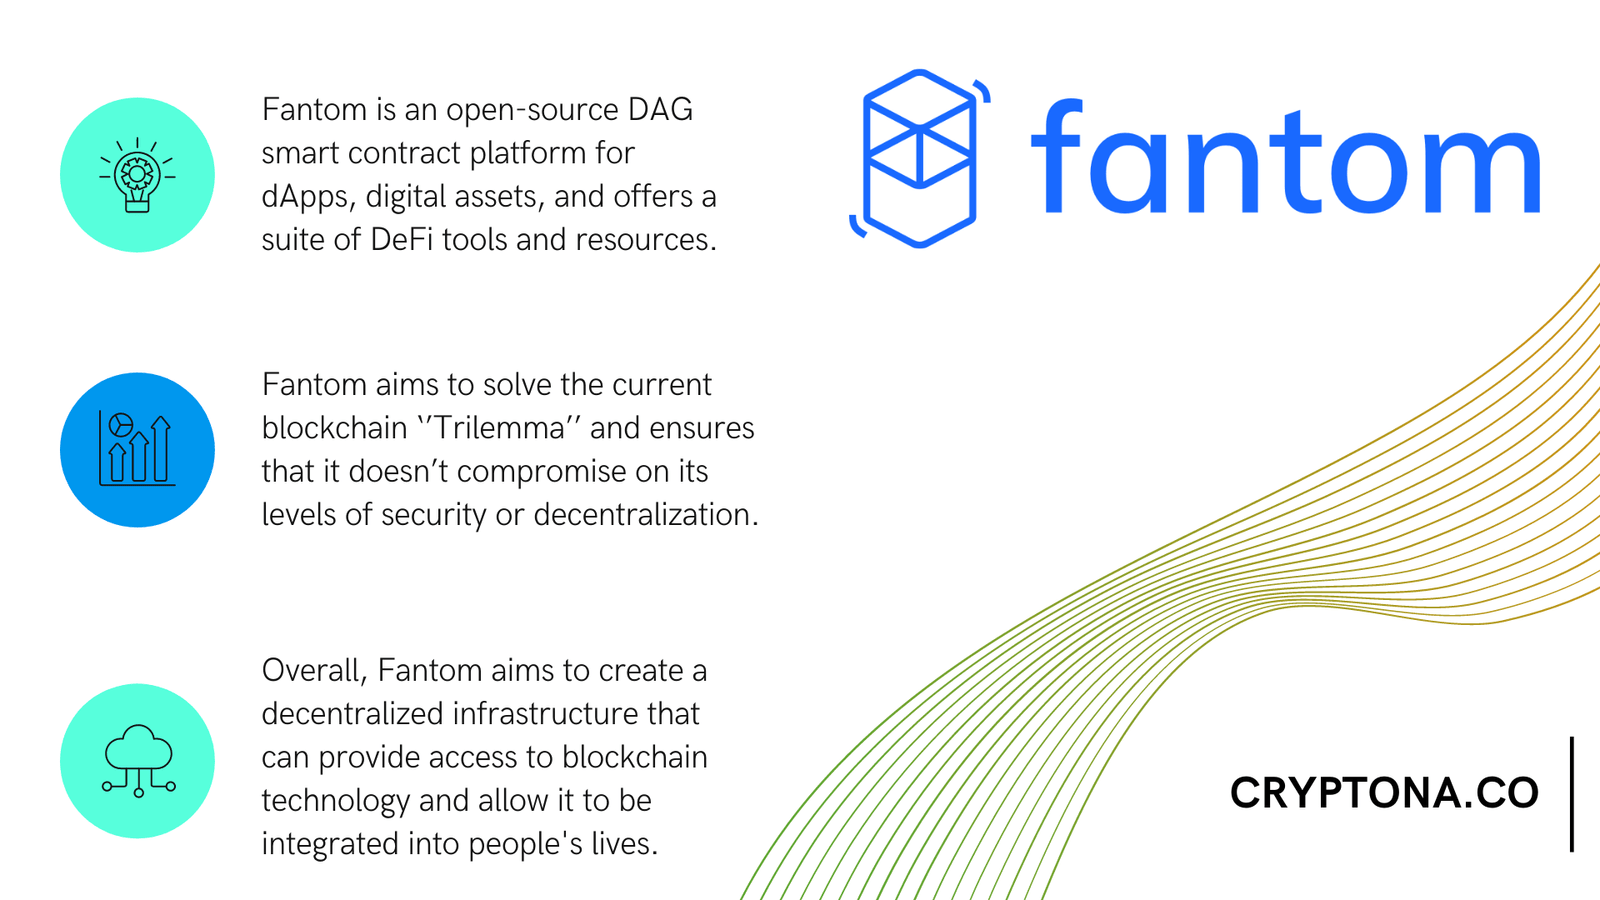 What is Fantom crypto?